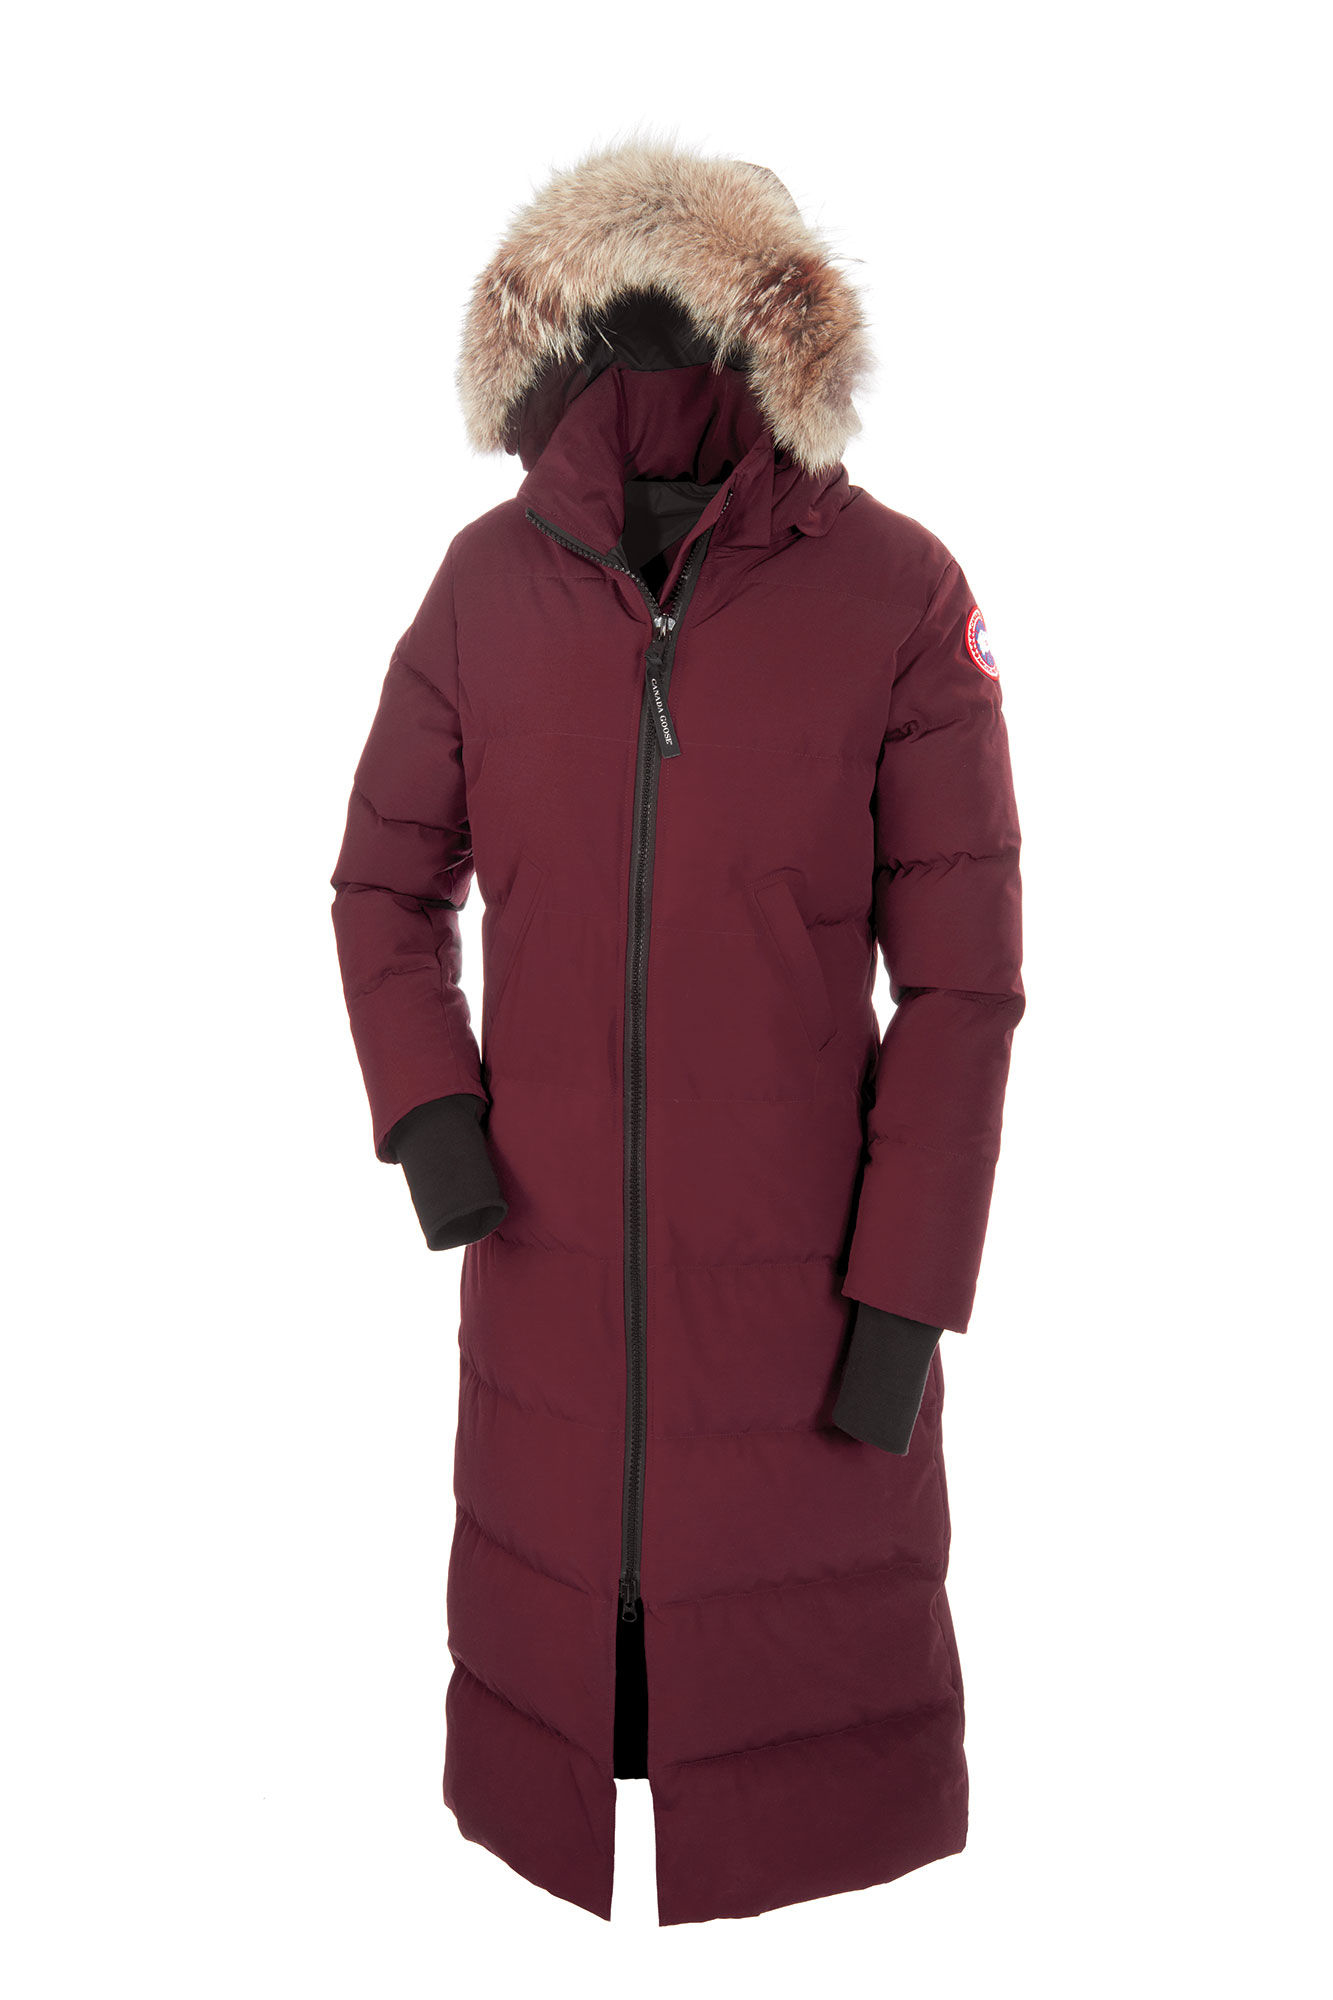 Canada Goose Mystique Parka In Red Bordeaux Lyst